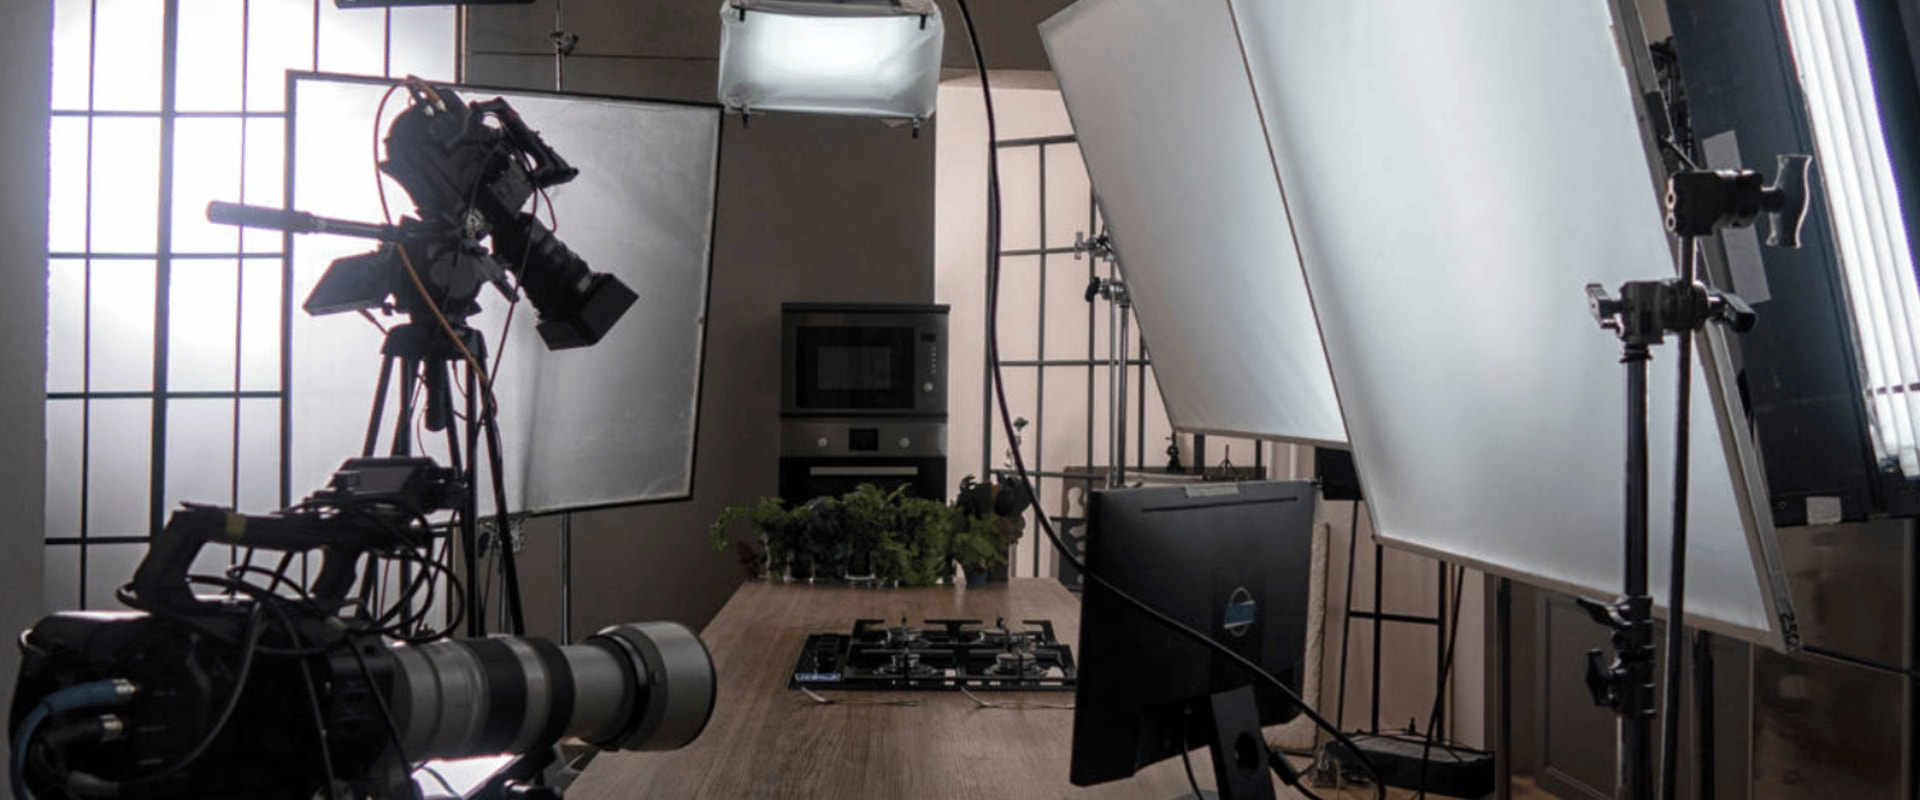 Lighting Gear for Product Photography Services and Equipment